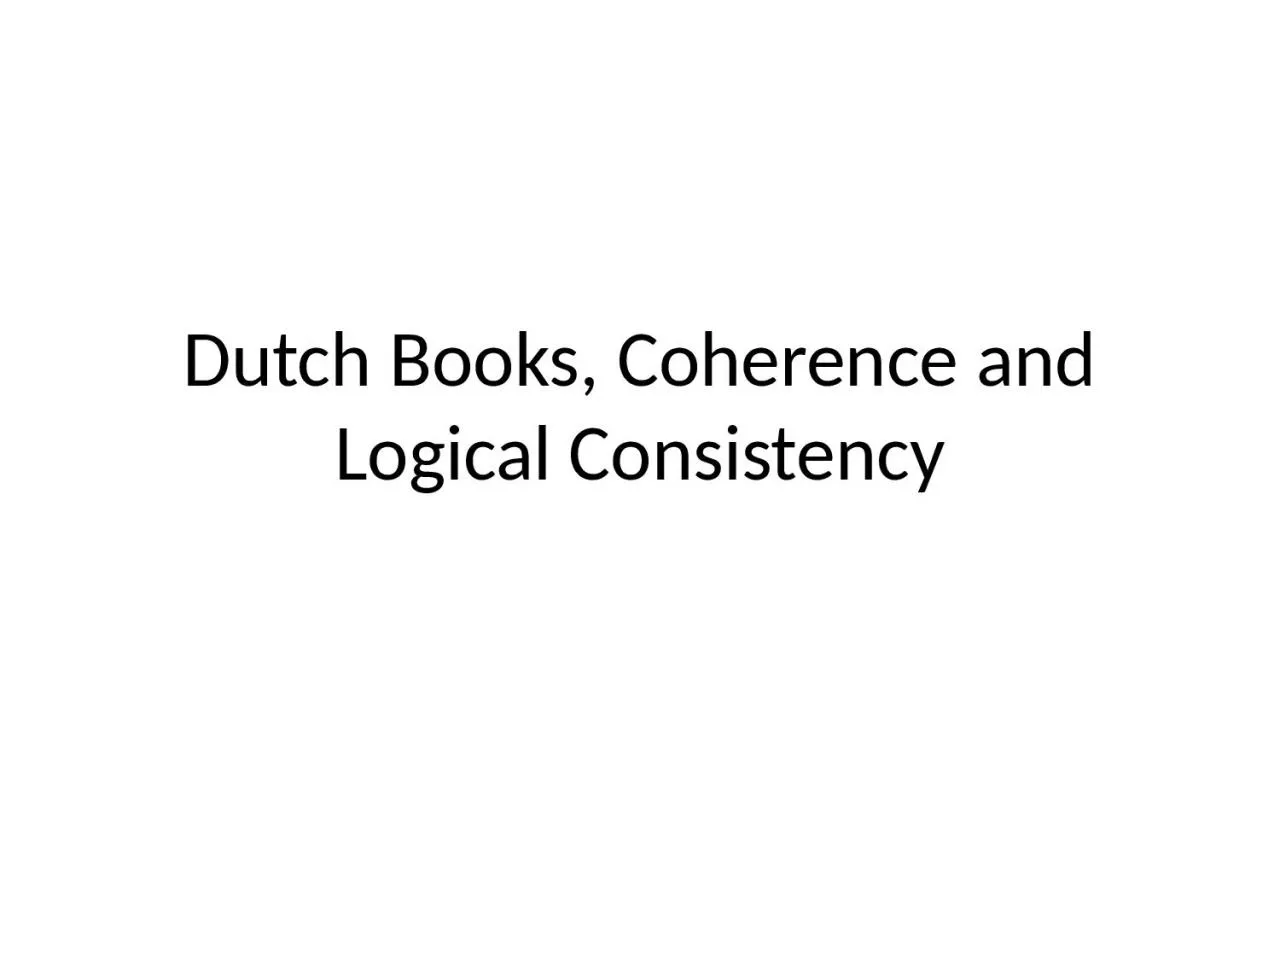 Dutch Books, Coherence and Logical Consistency